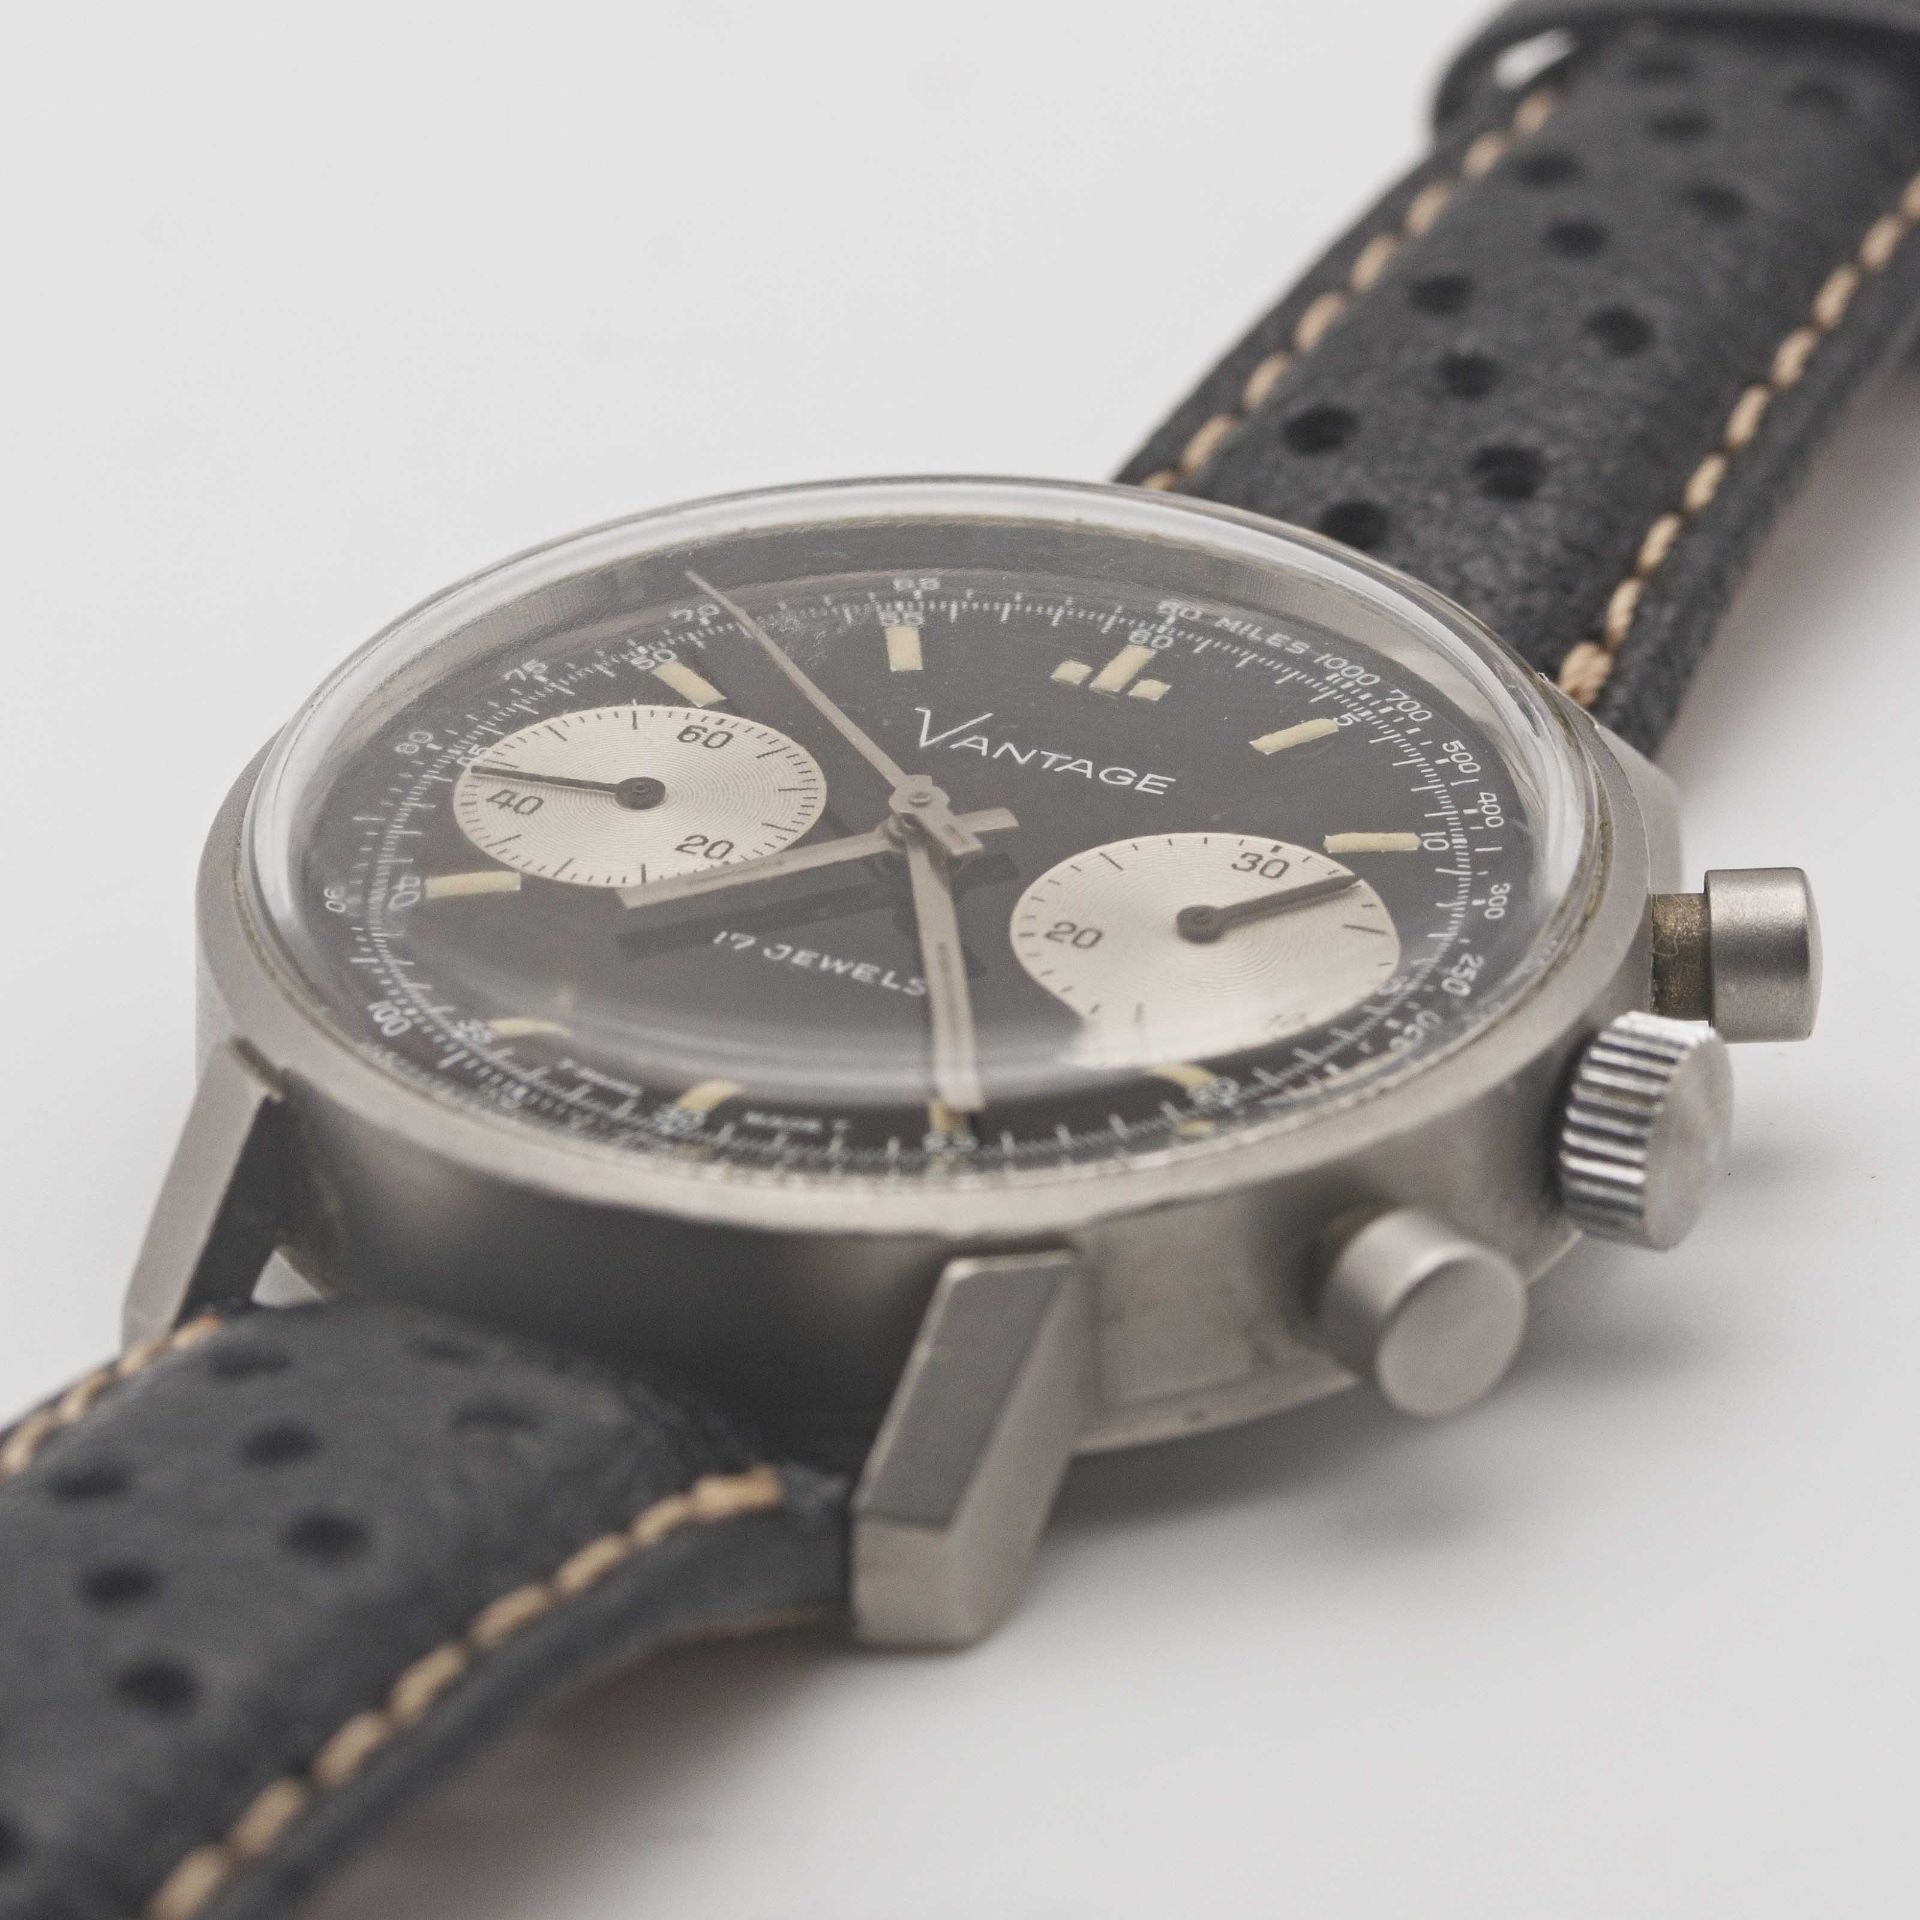 A GENTLEMAN'S STAINLESS STEEL VANTAGE CHRONOGRAPH WRIST WATCH CIRCA 1970, WITH GLOSS BLACK DIAL - Image 3 of 9